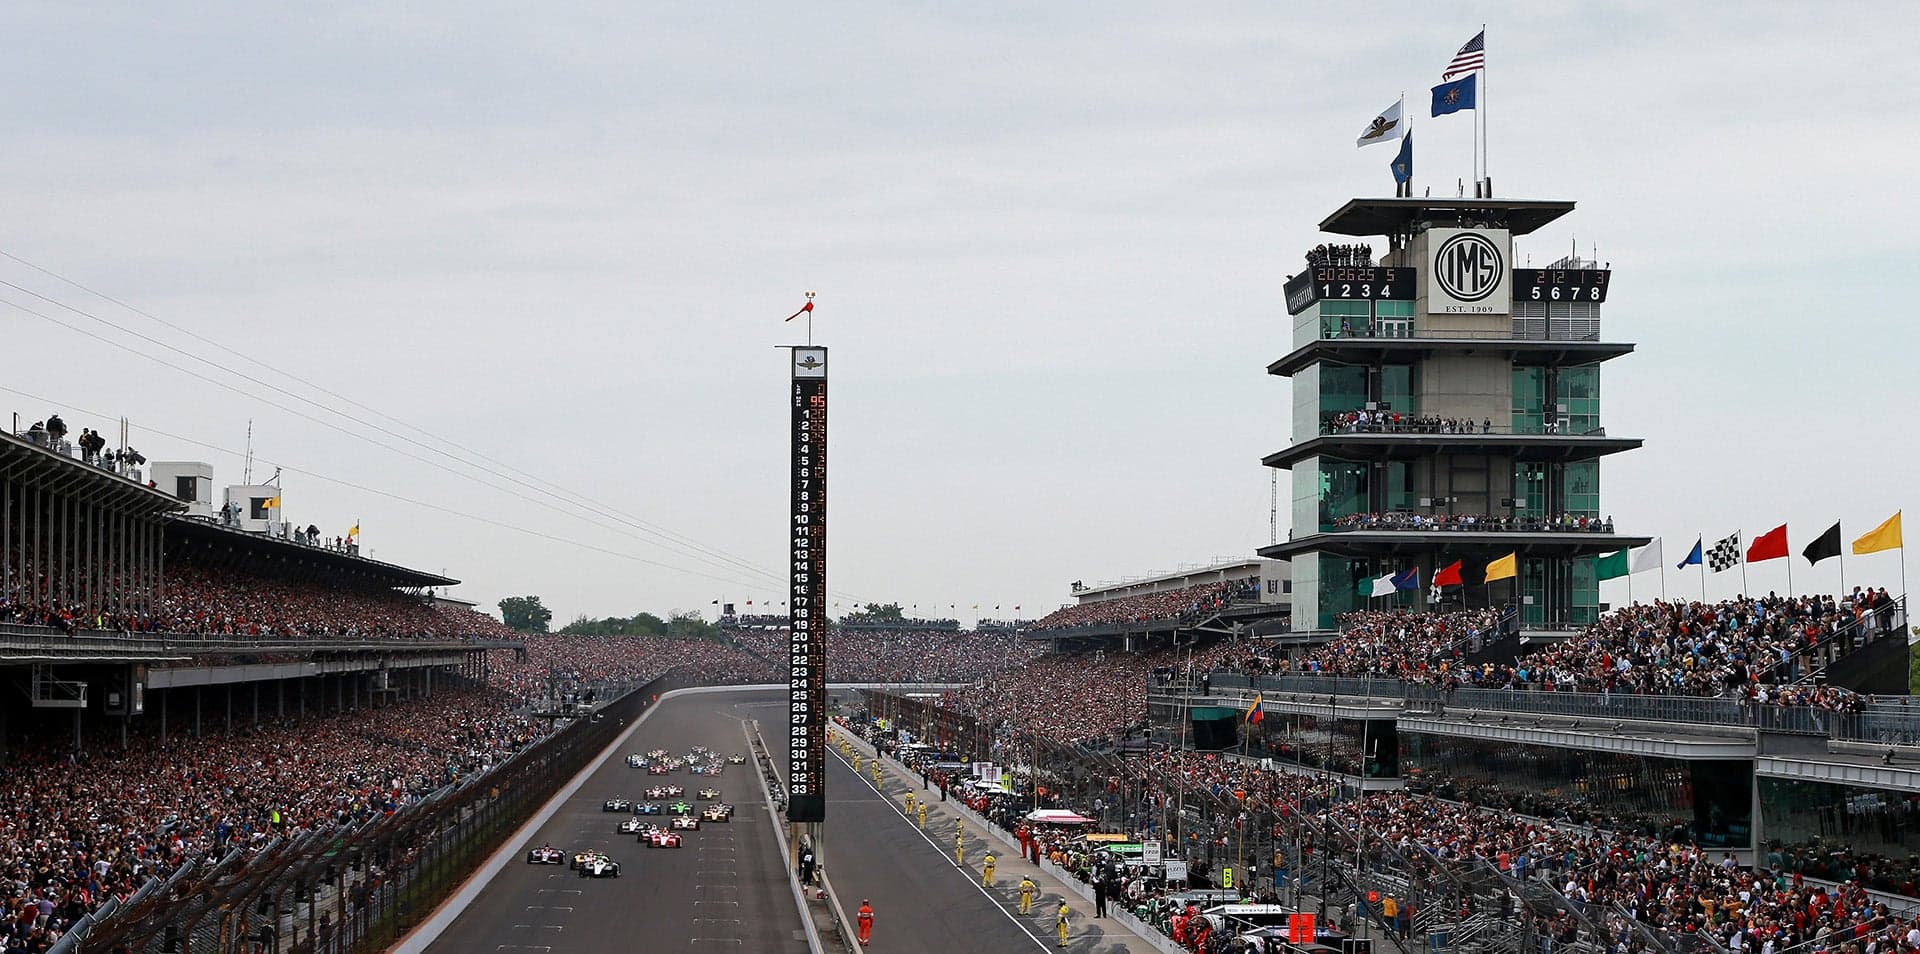 A Preview of the 2017 Indianapolis 500